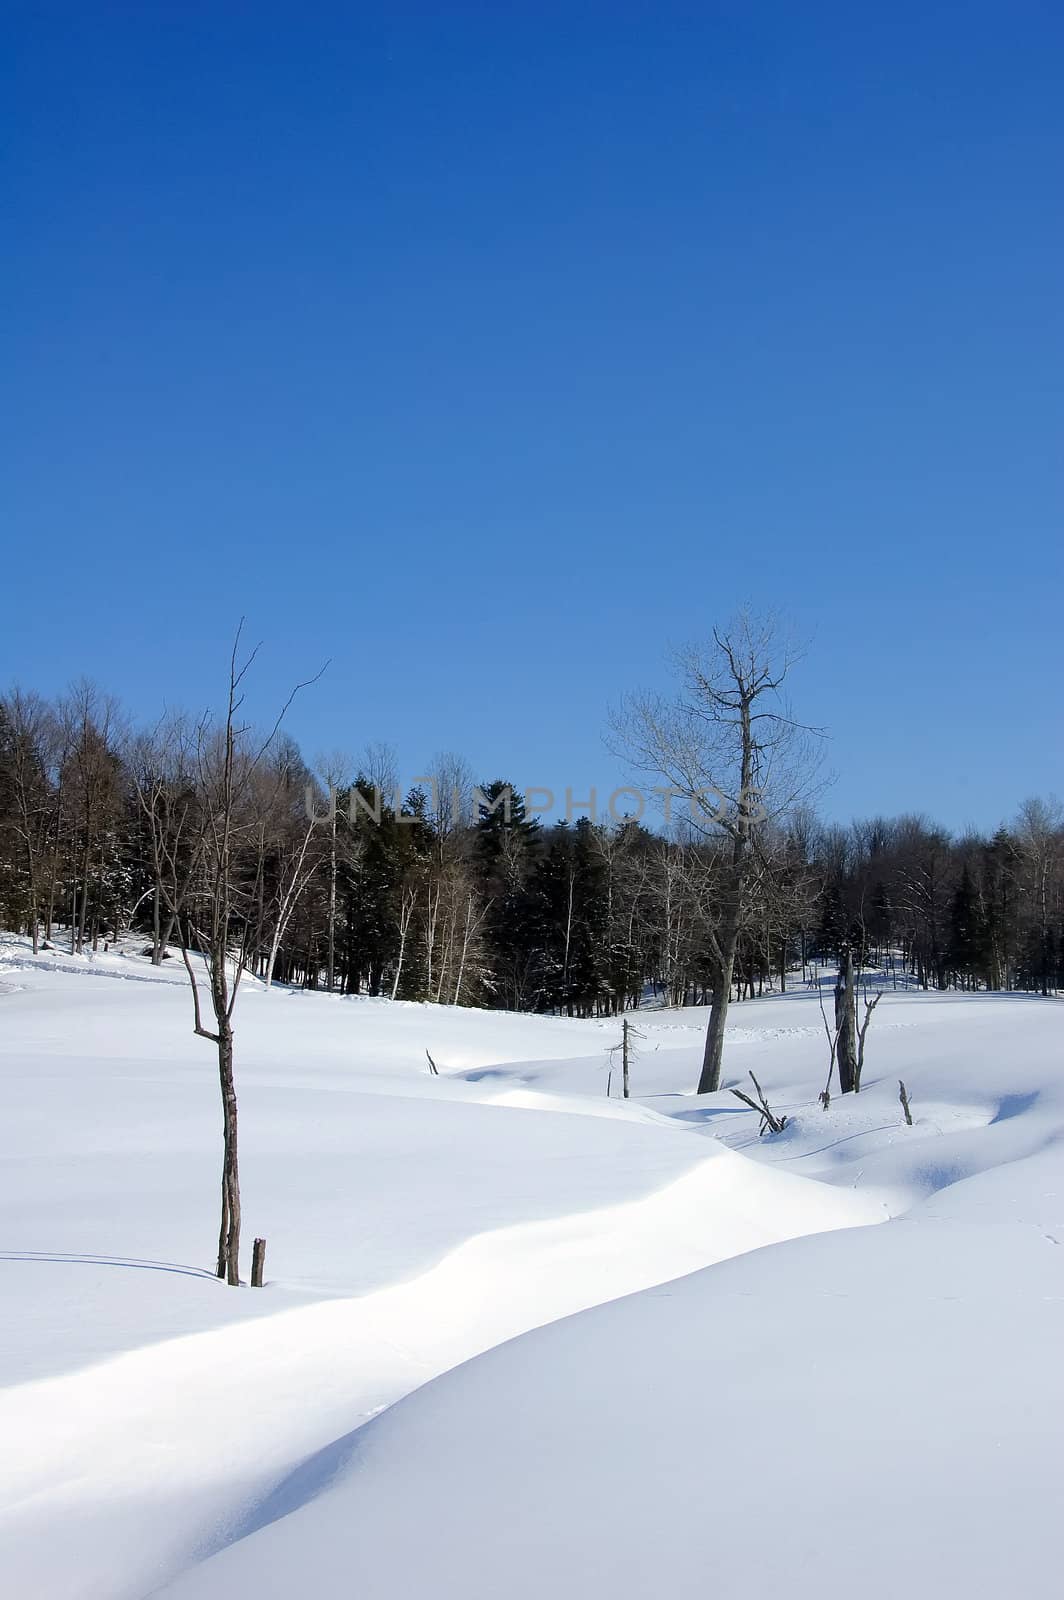 Winter landscape with a bright blue sky